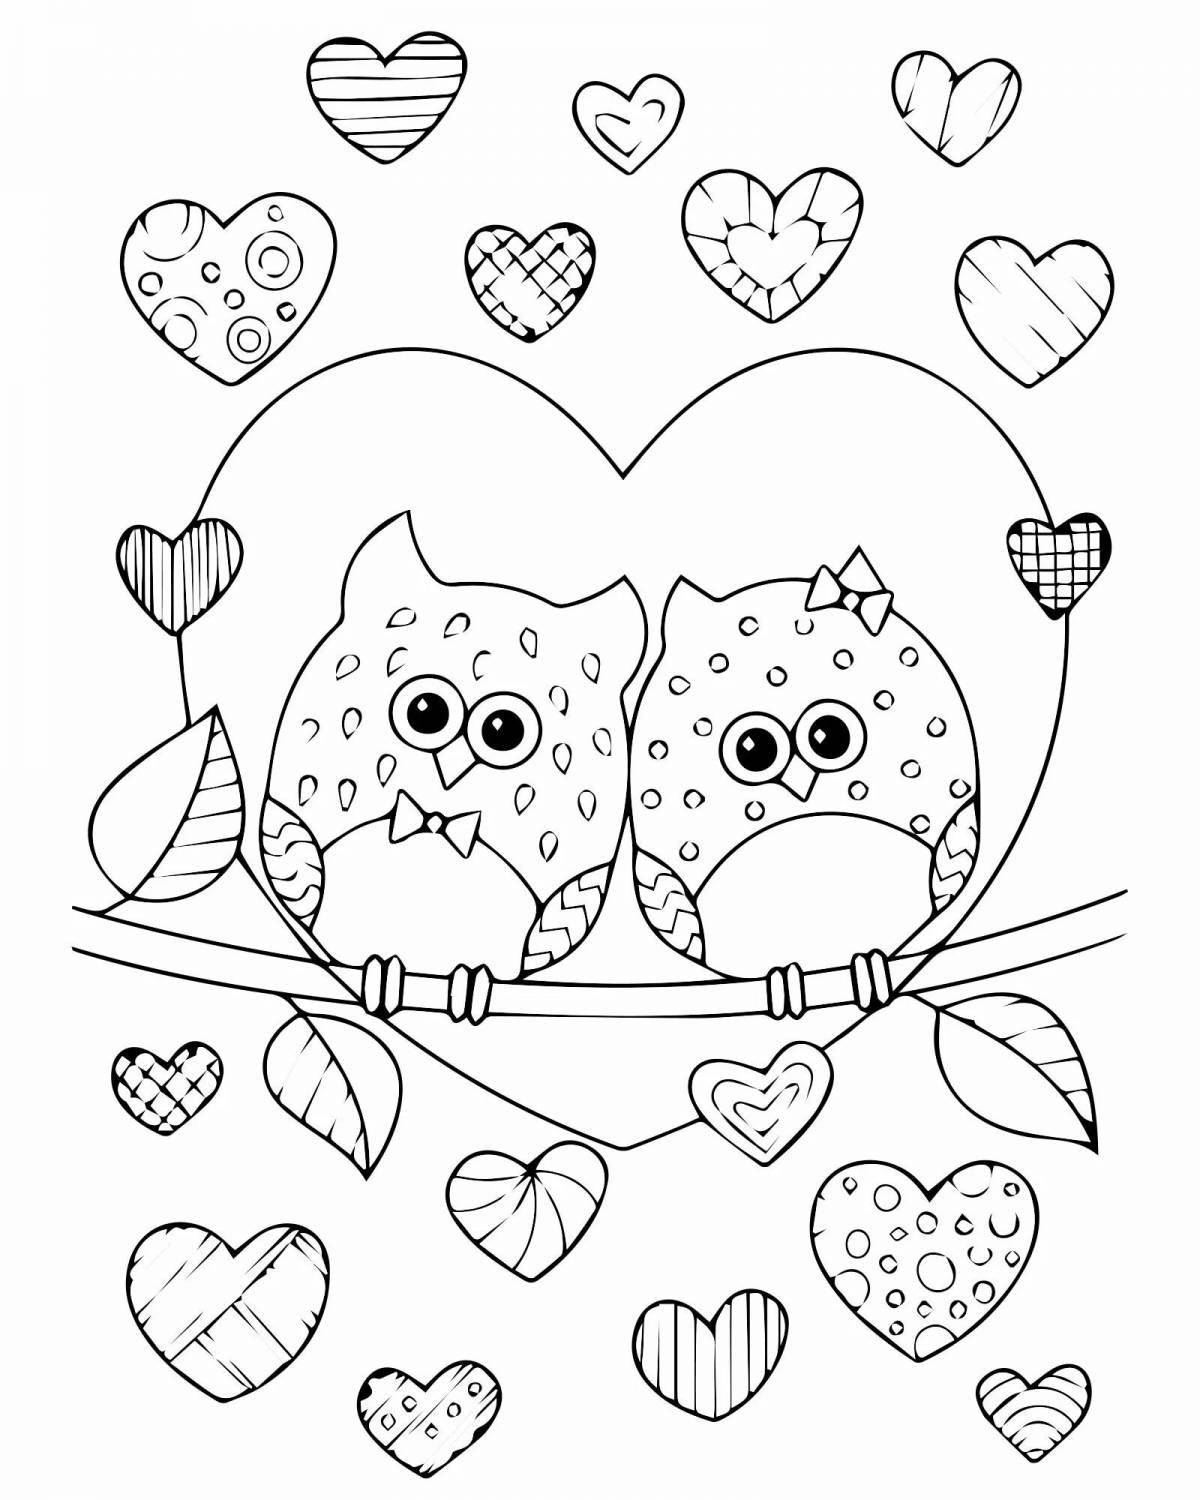 Colorful valentine coloring book for valentine's day for kids